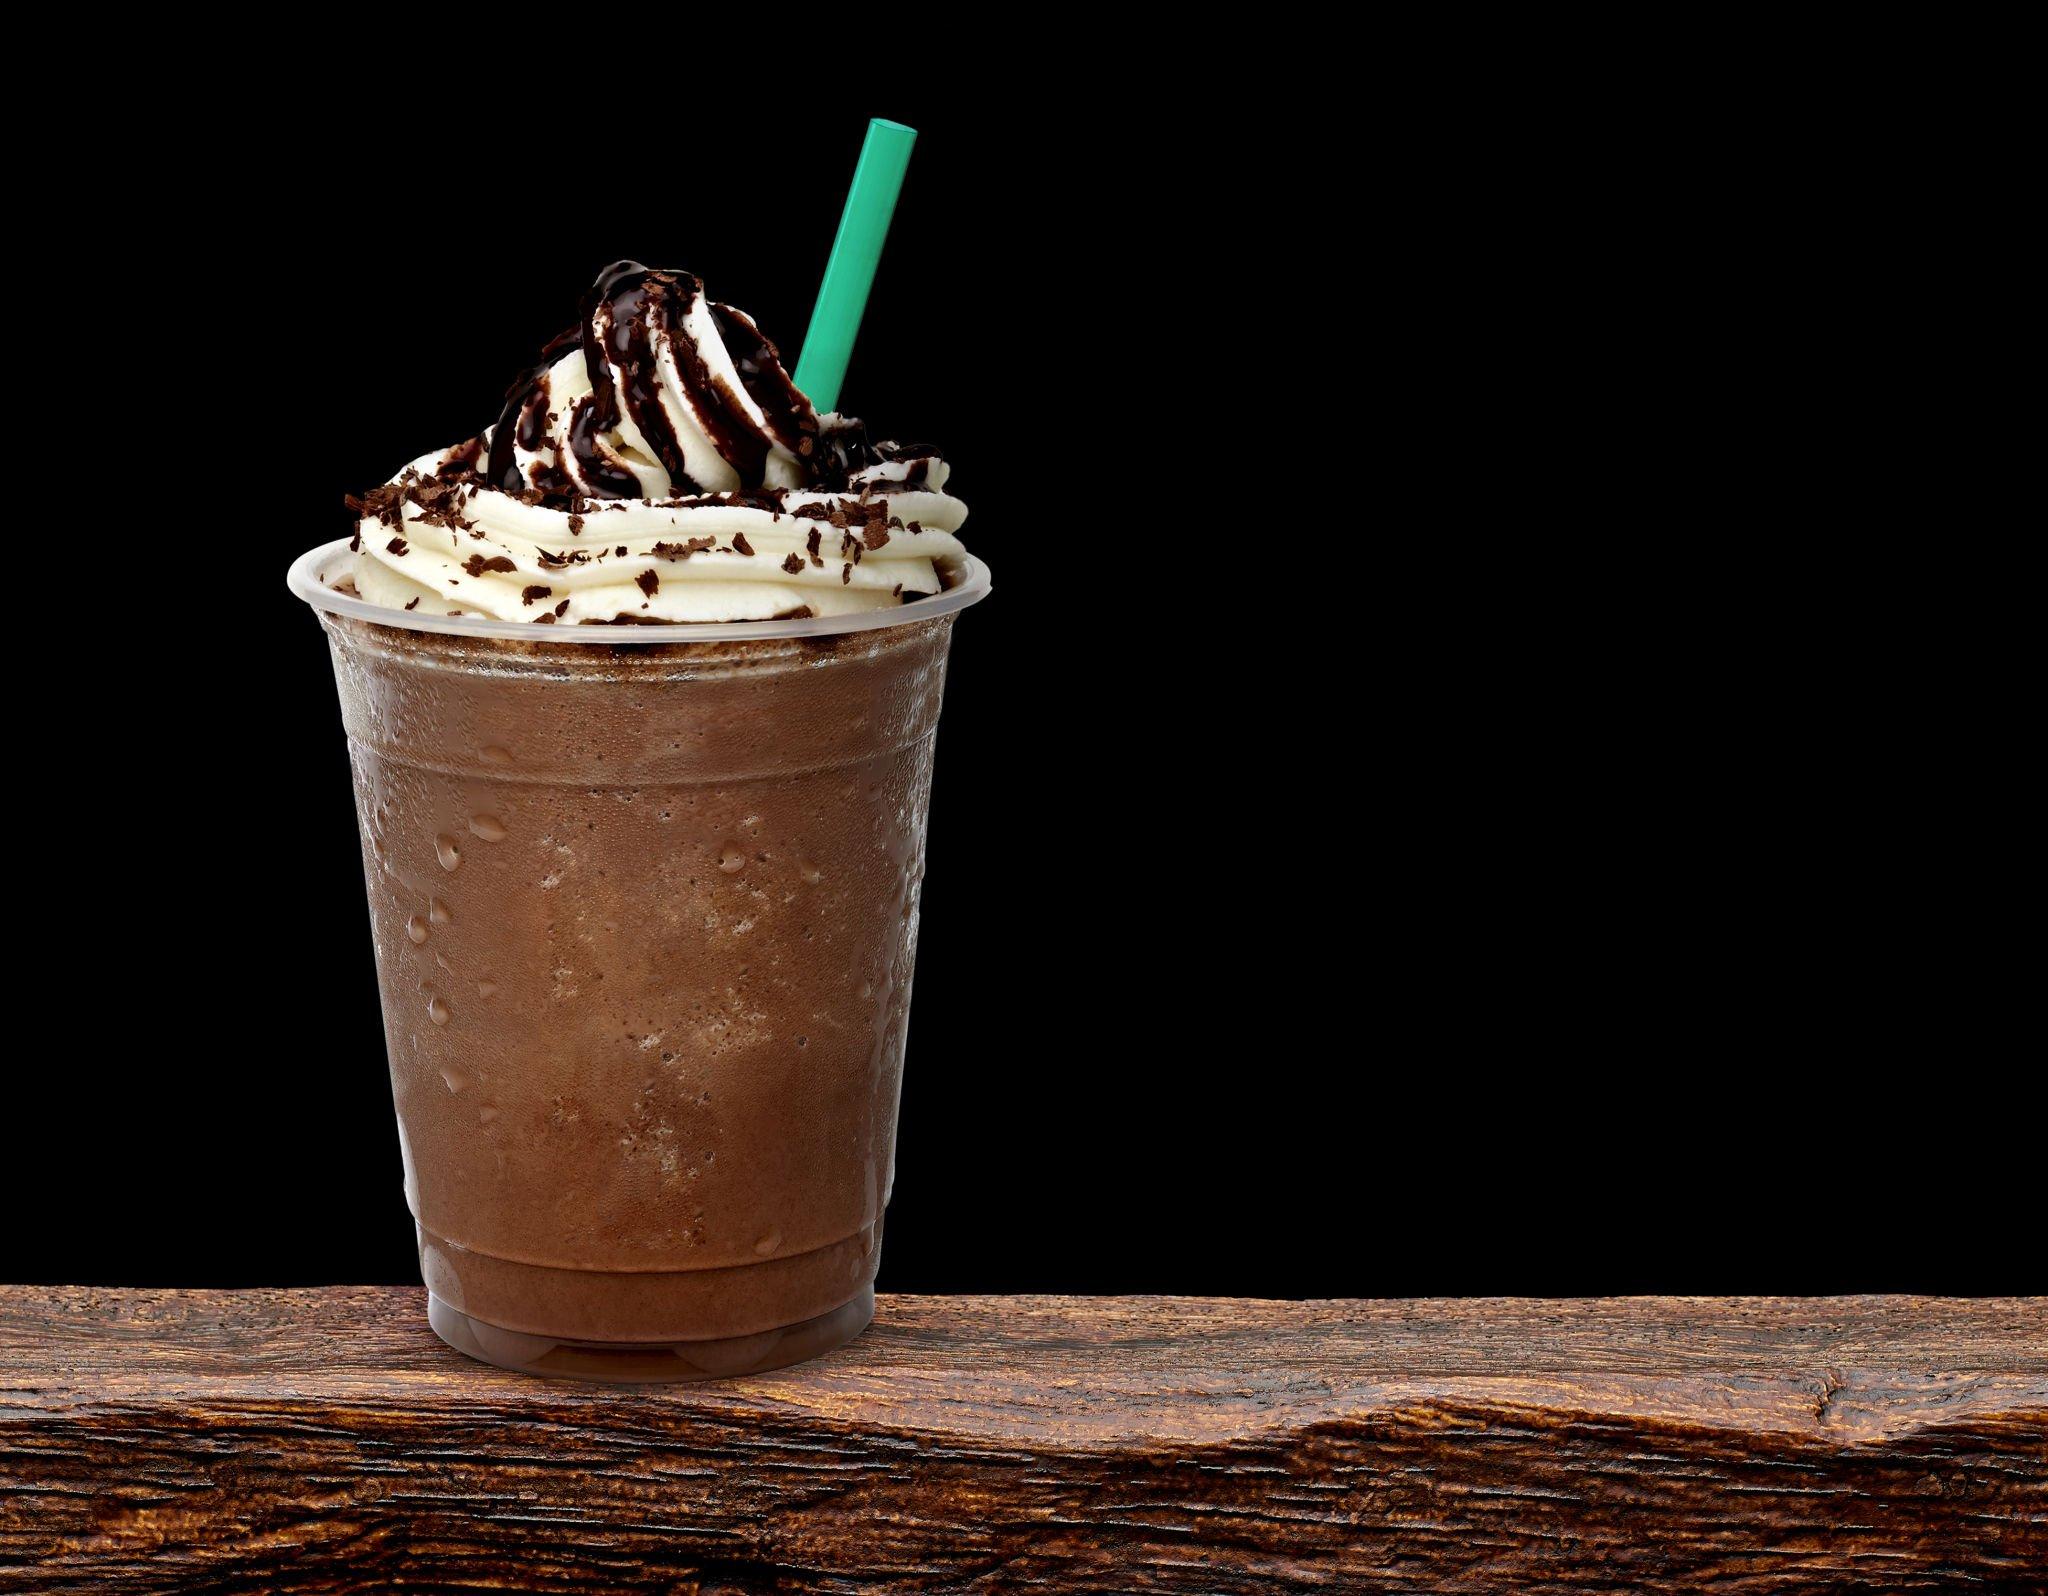 Discover surprising facts about Frappuccinos: What are they & what's in them?